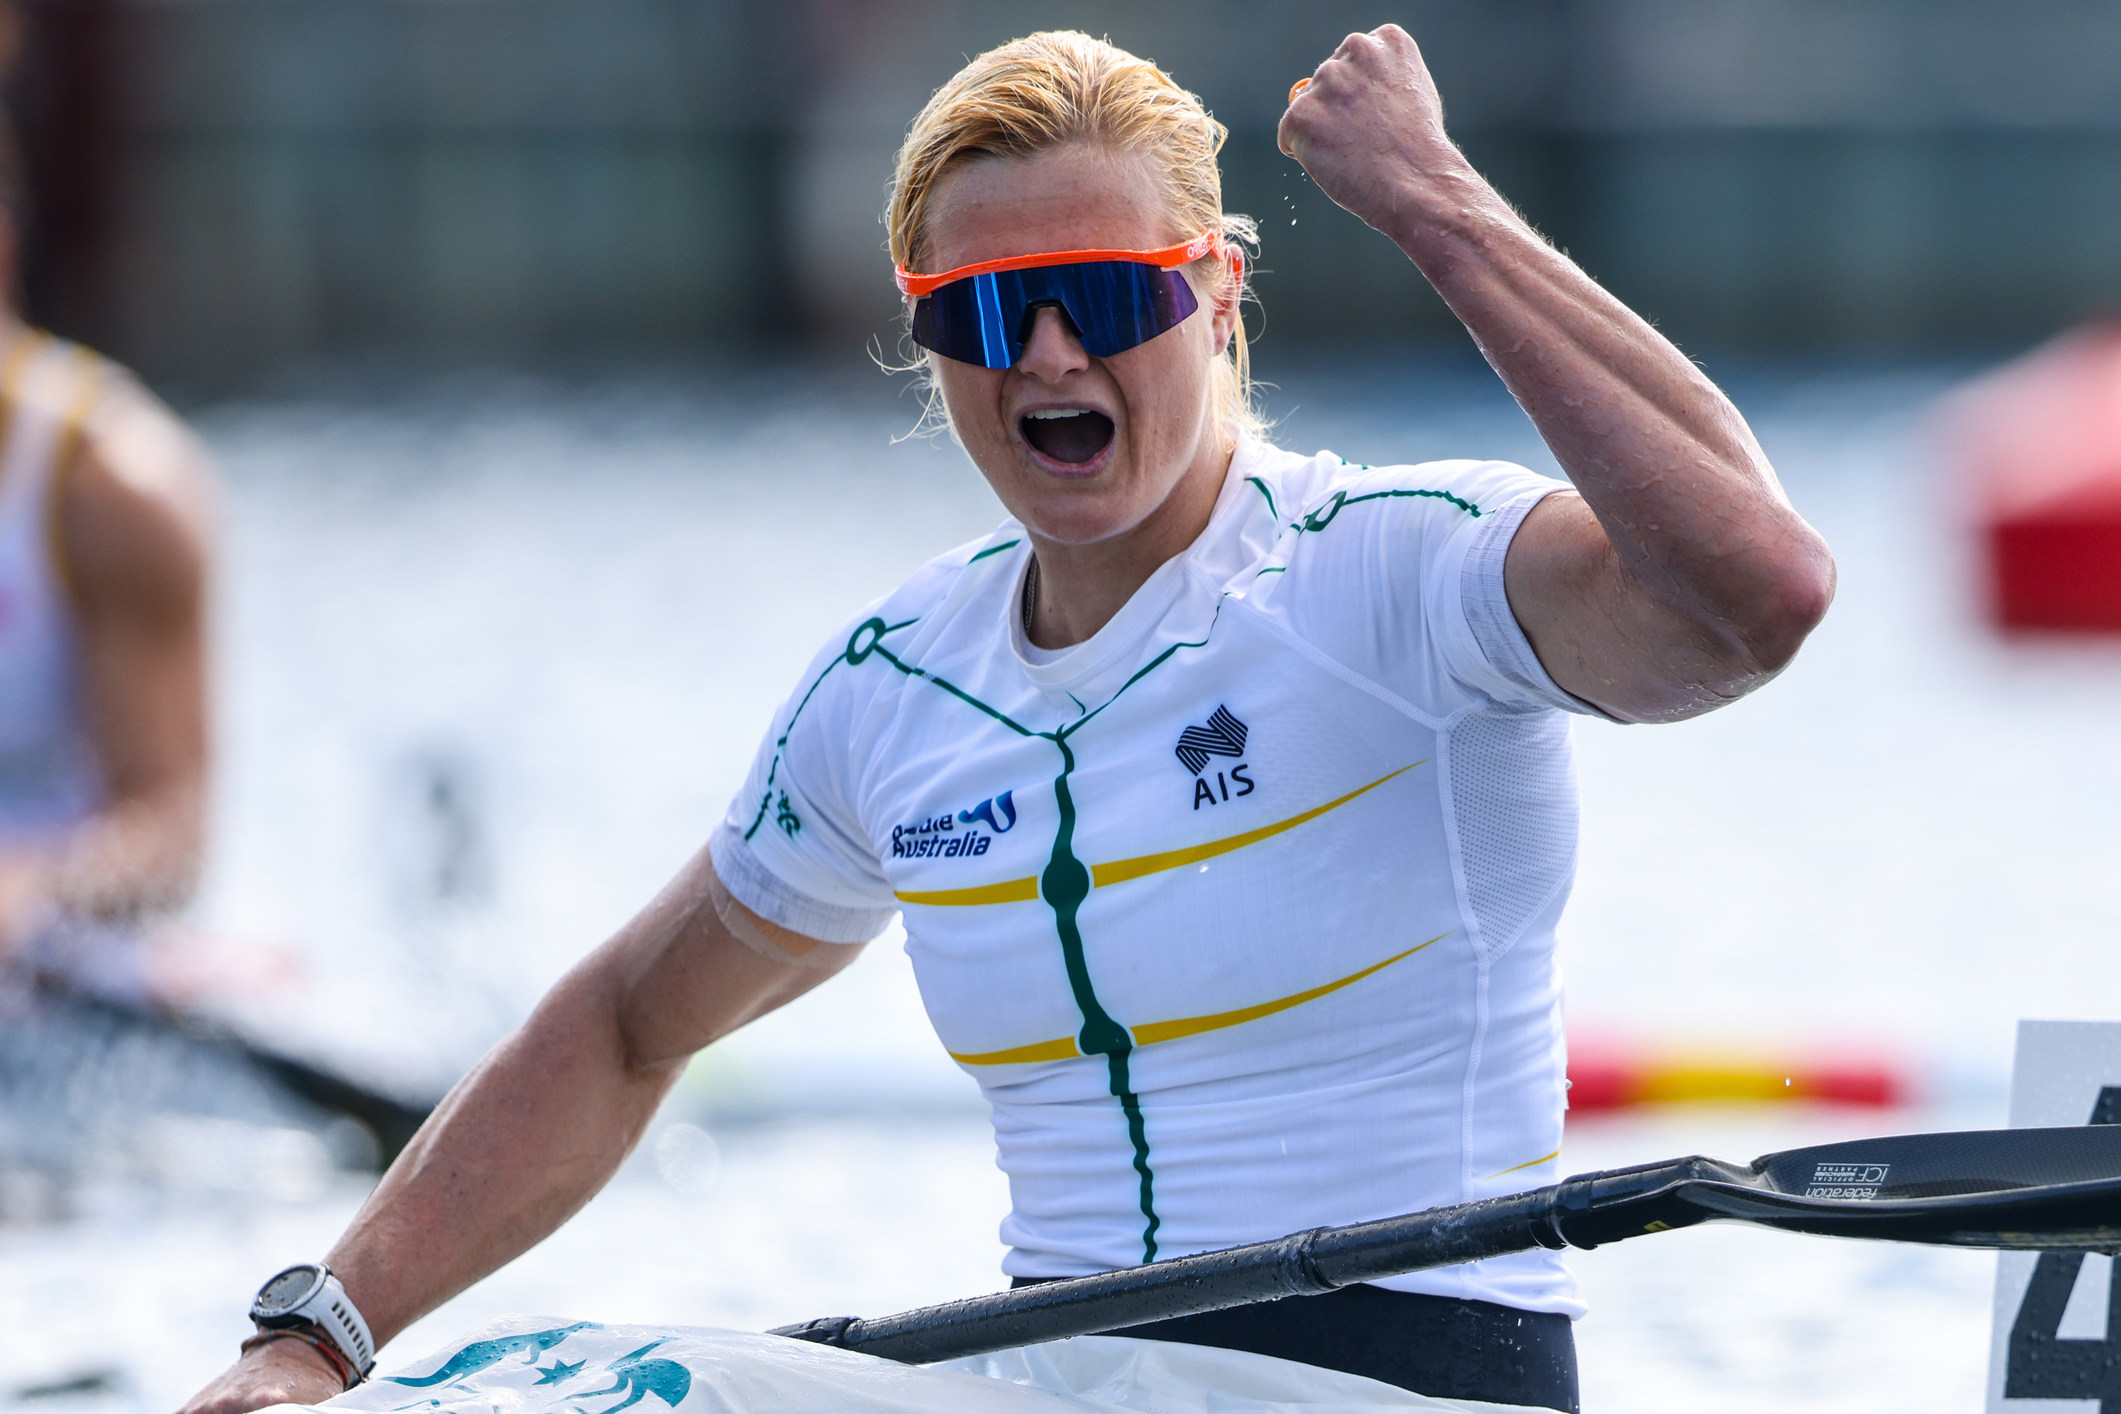 ‘Pretty cool’: sprint paddler defends world title